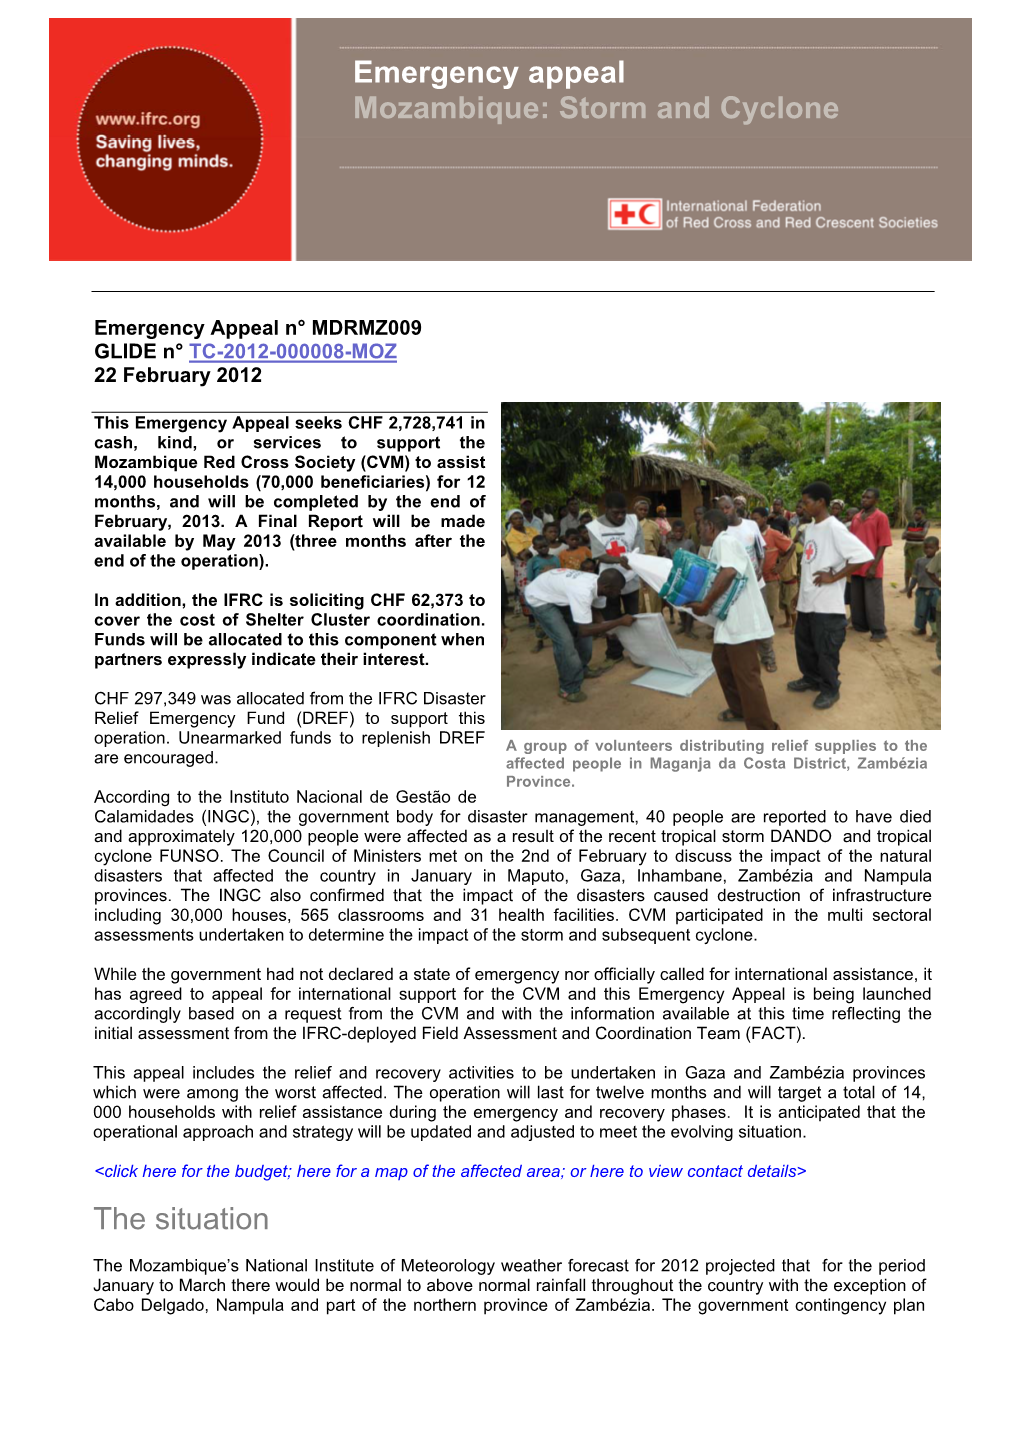 Emergency Appeal Mozambique: Storm and Cyclone the Situation